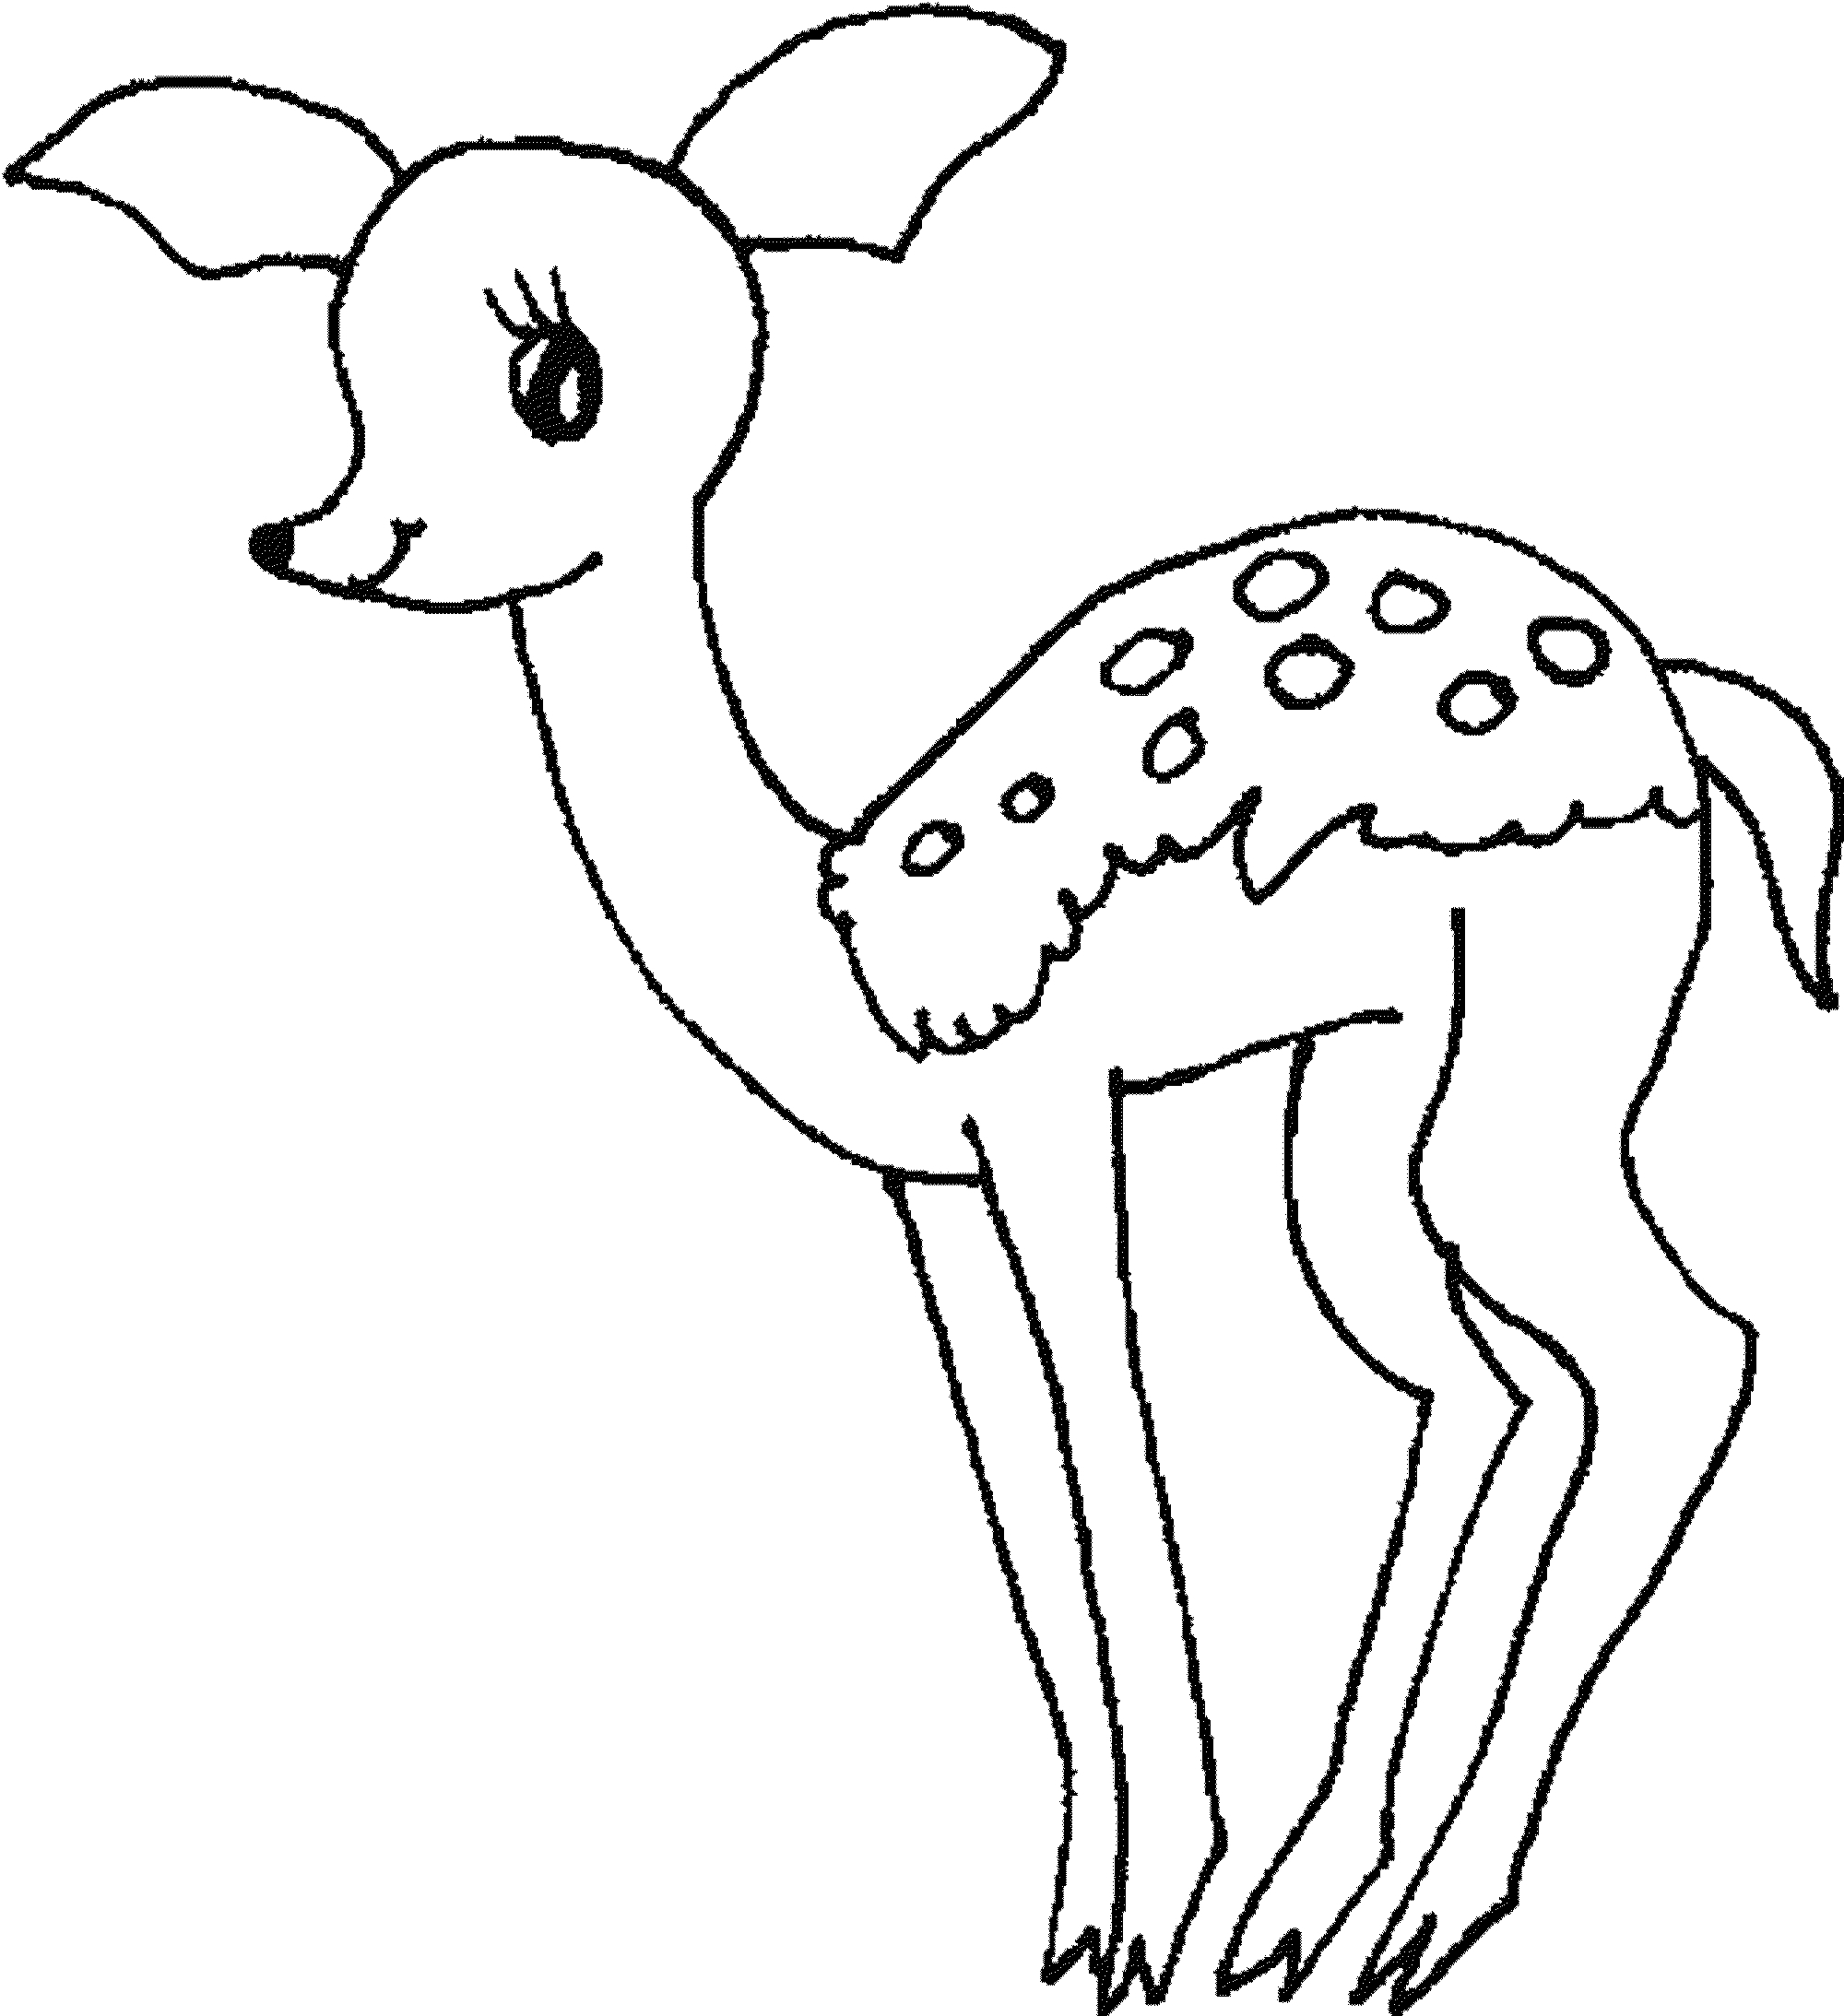 Deer Coloring Pages Easy Deer Coloring Pages Printable Coloring Page For Kids